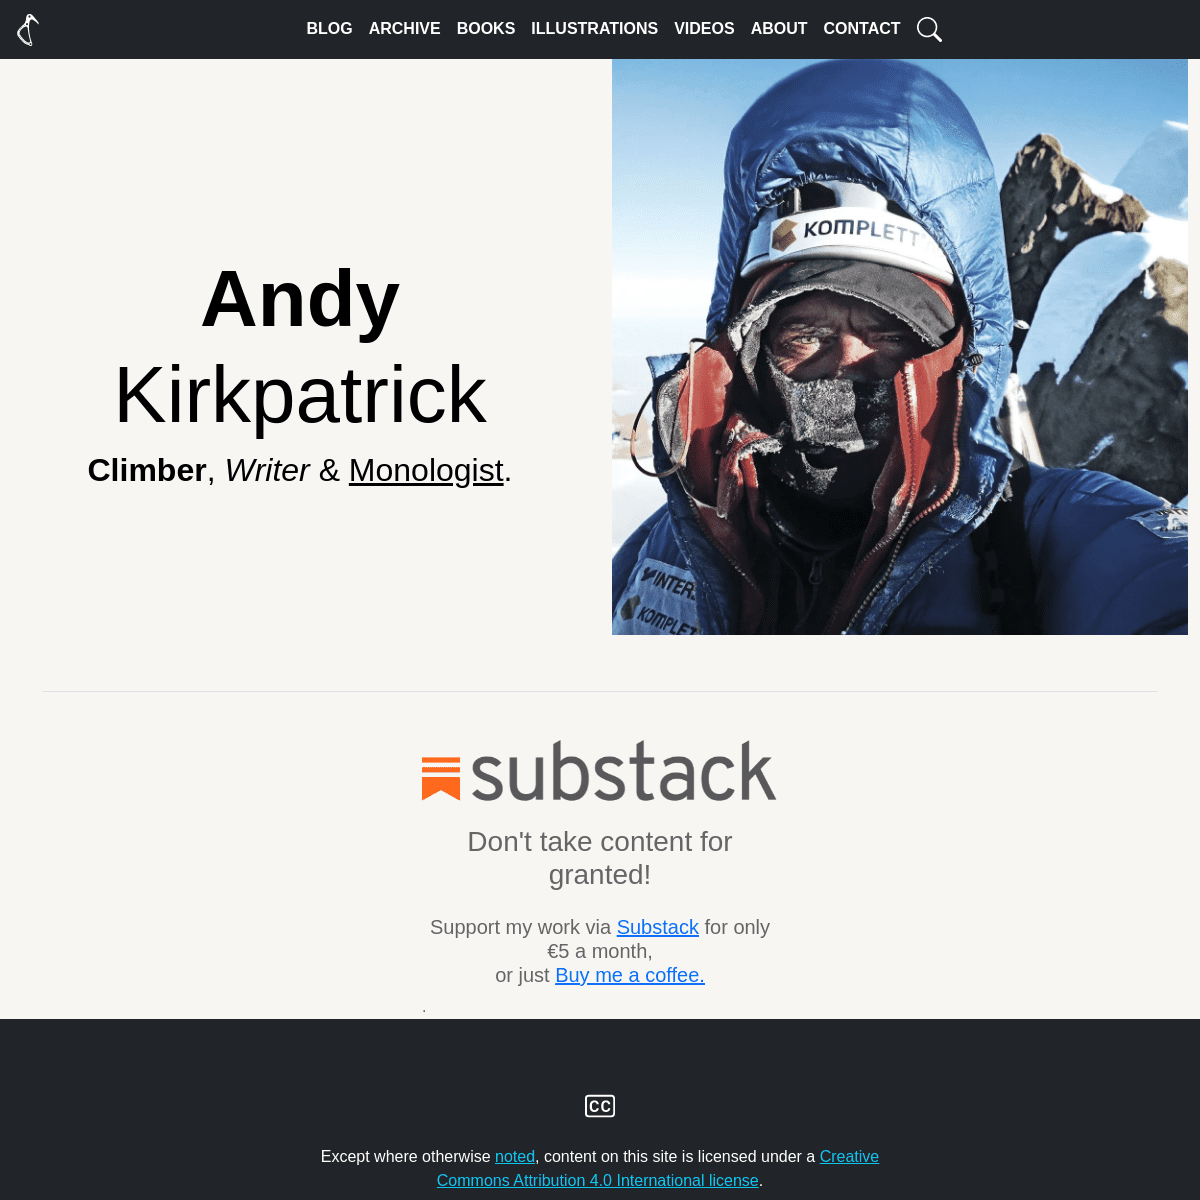 A complete backup of https://andy-kirkpatrick.com